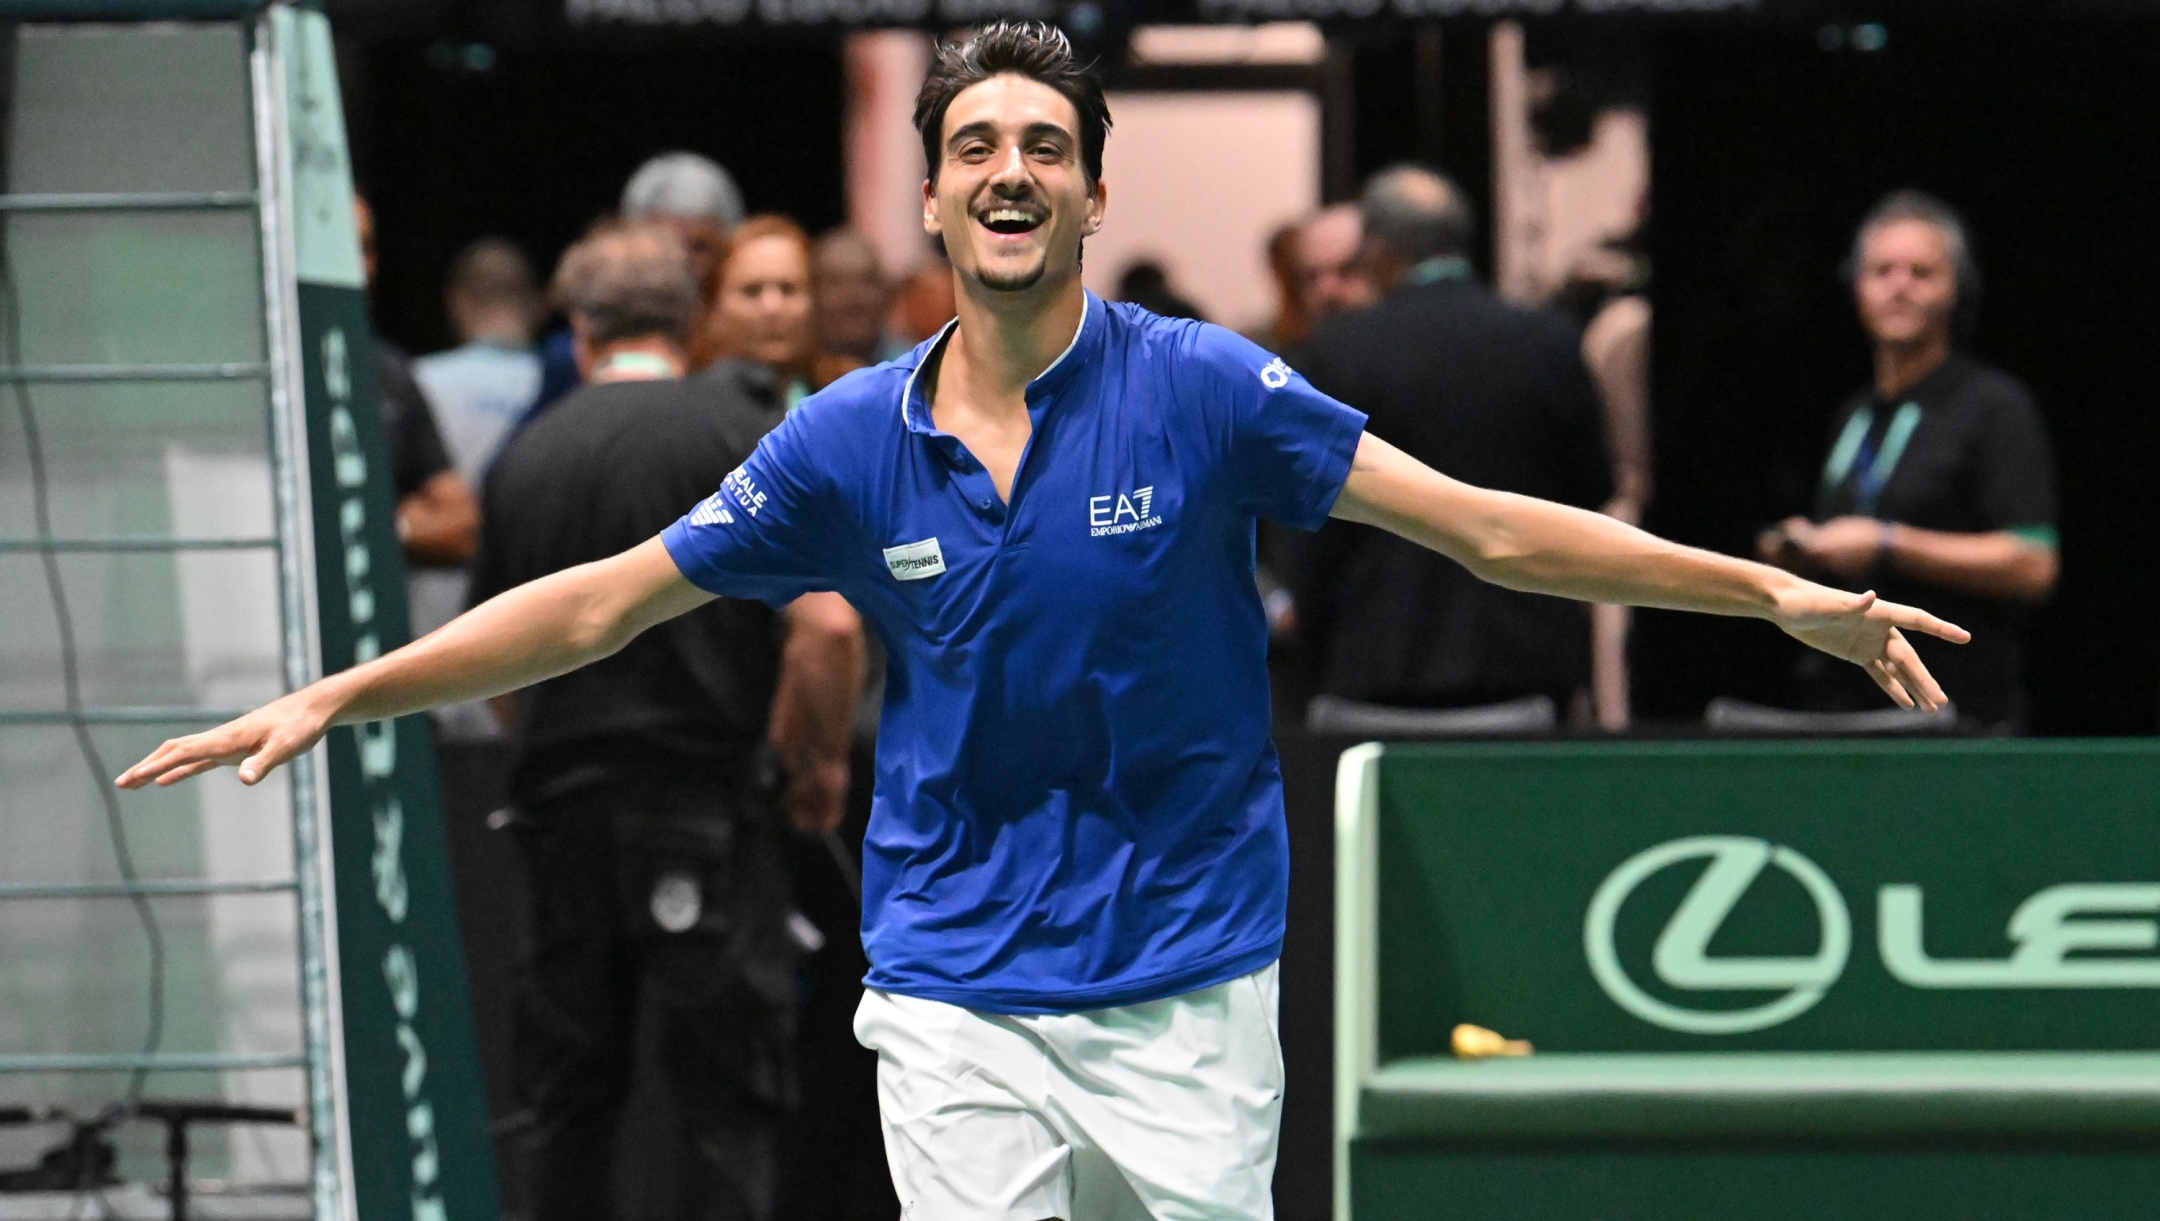 BOLOGNA, ITALY - SEPTEMBER 17: Lorenzo Sonego of Italy celebrates after match between Lorenzo Sonego of Italy and Elias Ymer of Sweden during 2023 Davis Cup Finals Group Stage Bologna - Day 6  at Unipol Arena on September 17, 2023 in Bologna, Italy. (Photo by Giuseppe Bellini/Getty Images for ITF)